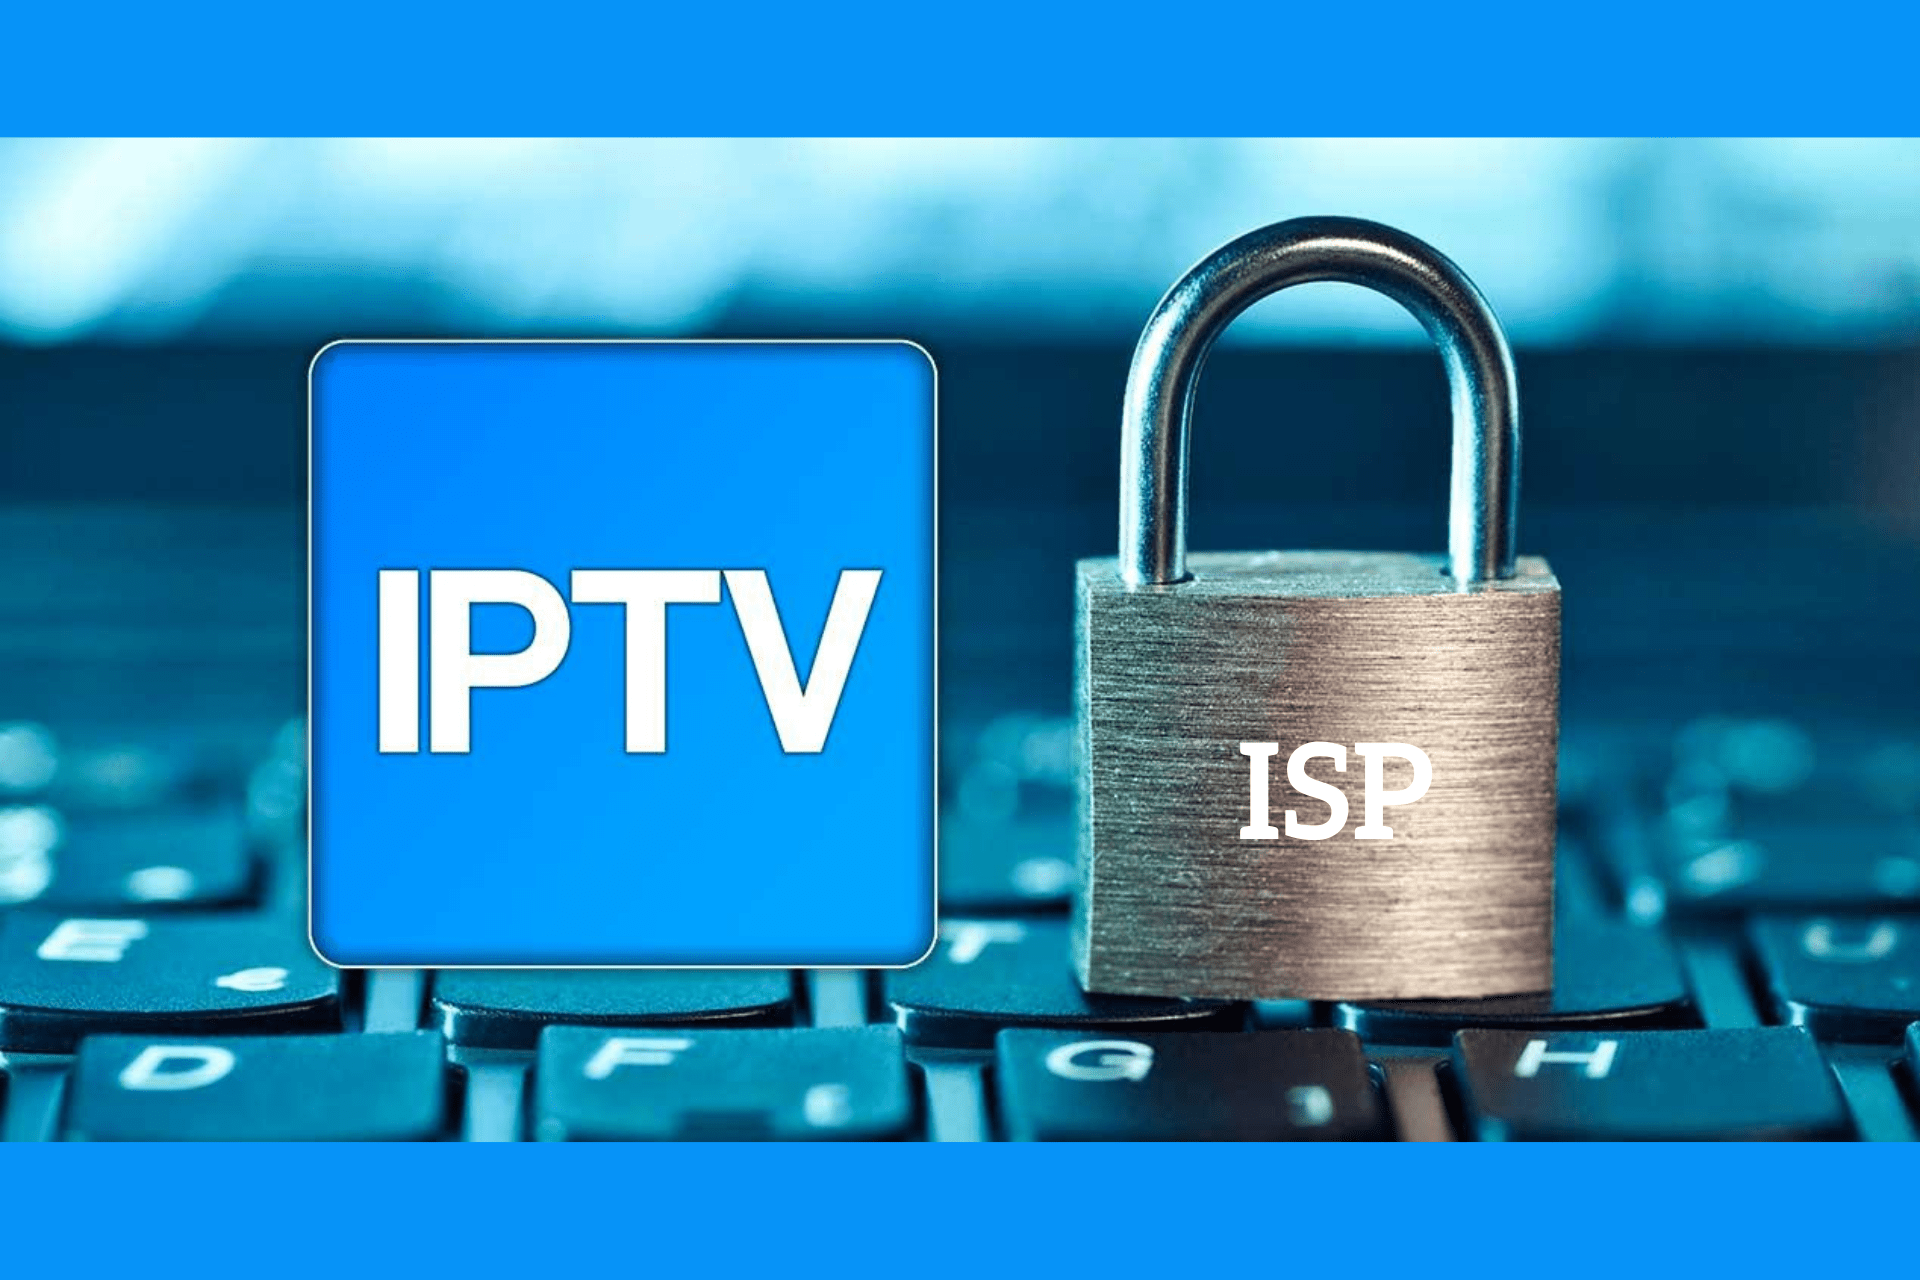 This order empowers the country's leading Internet Service Providers (ISPs) to prevent access to pirate IPTV services selected by Sky.